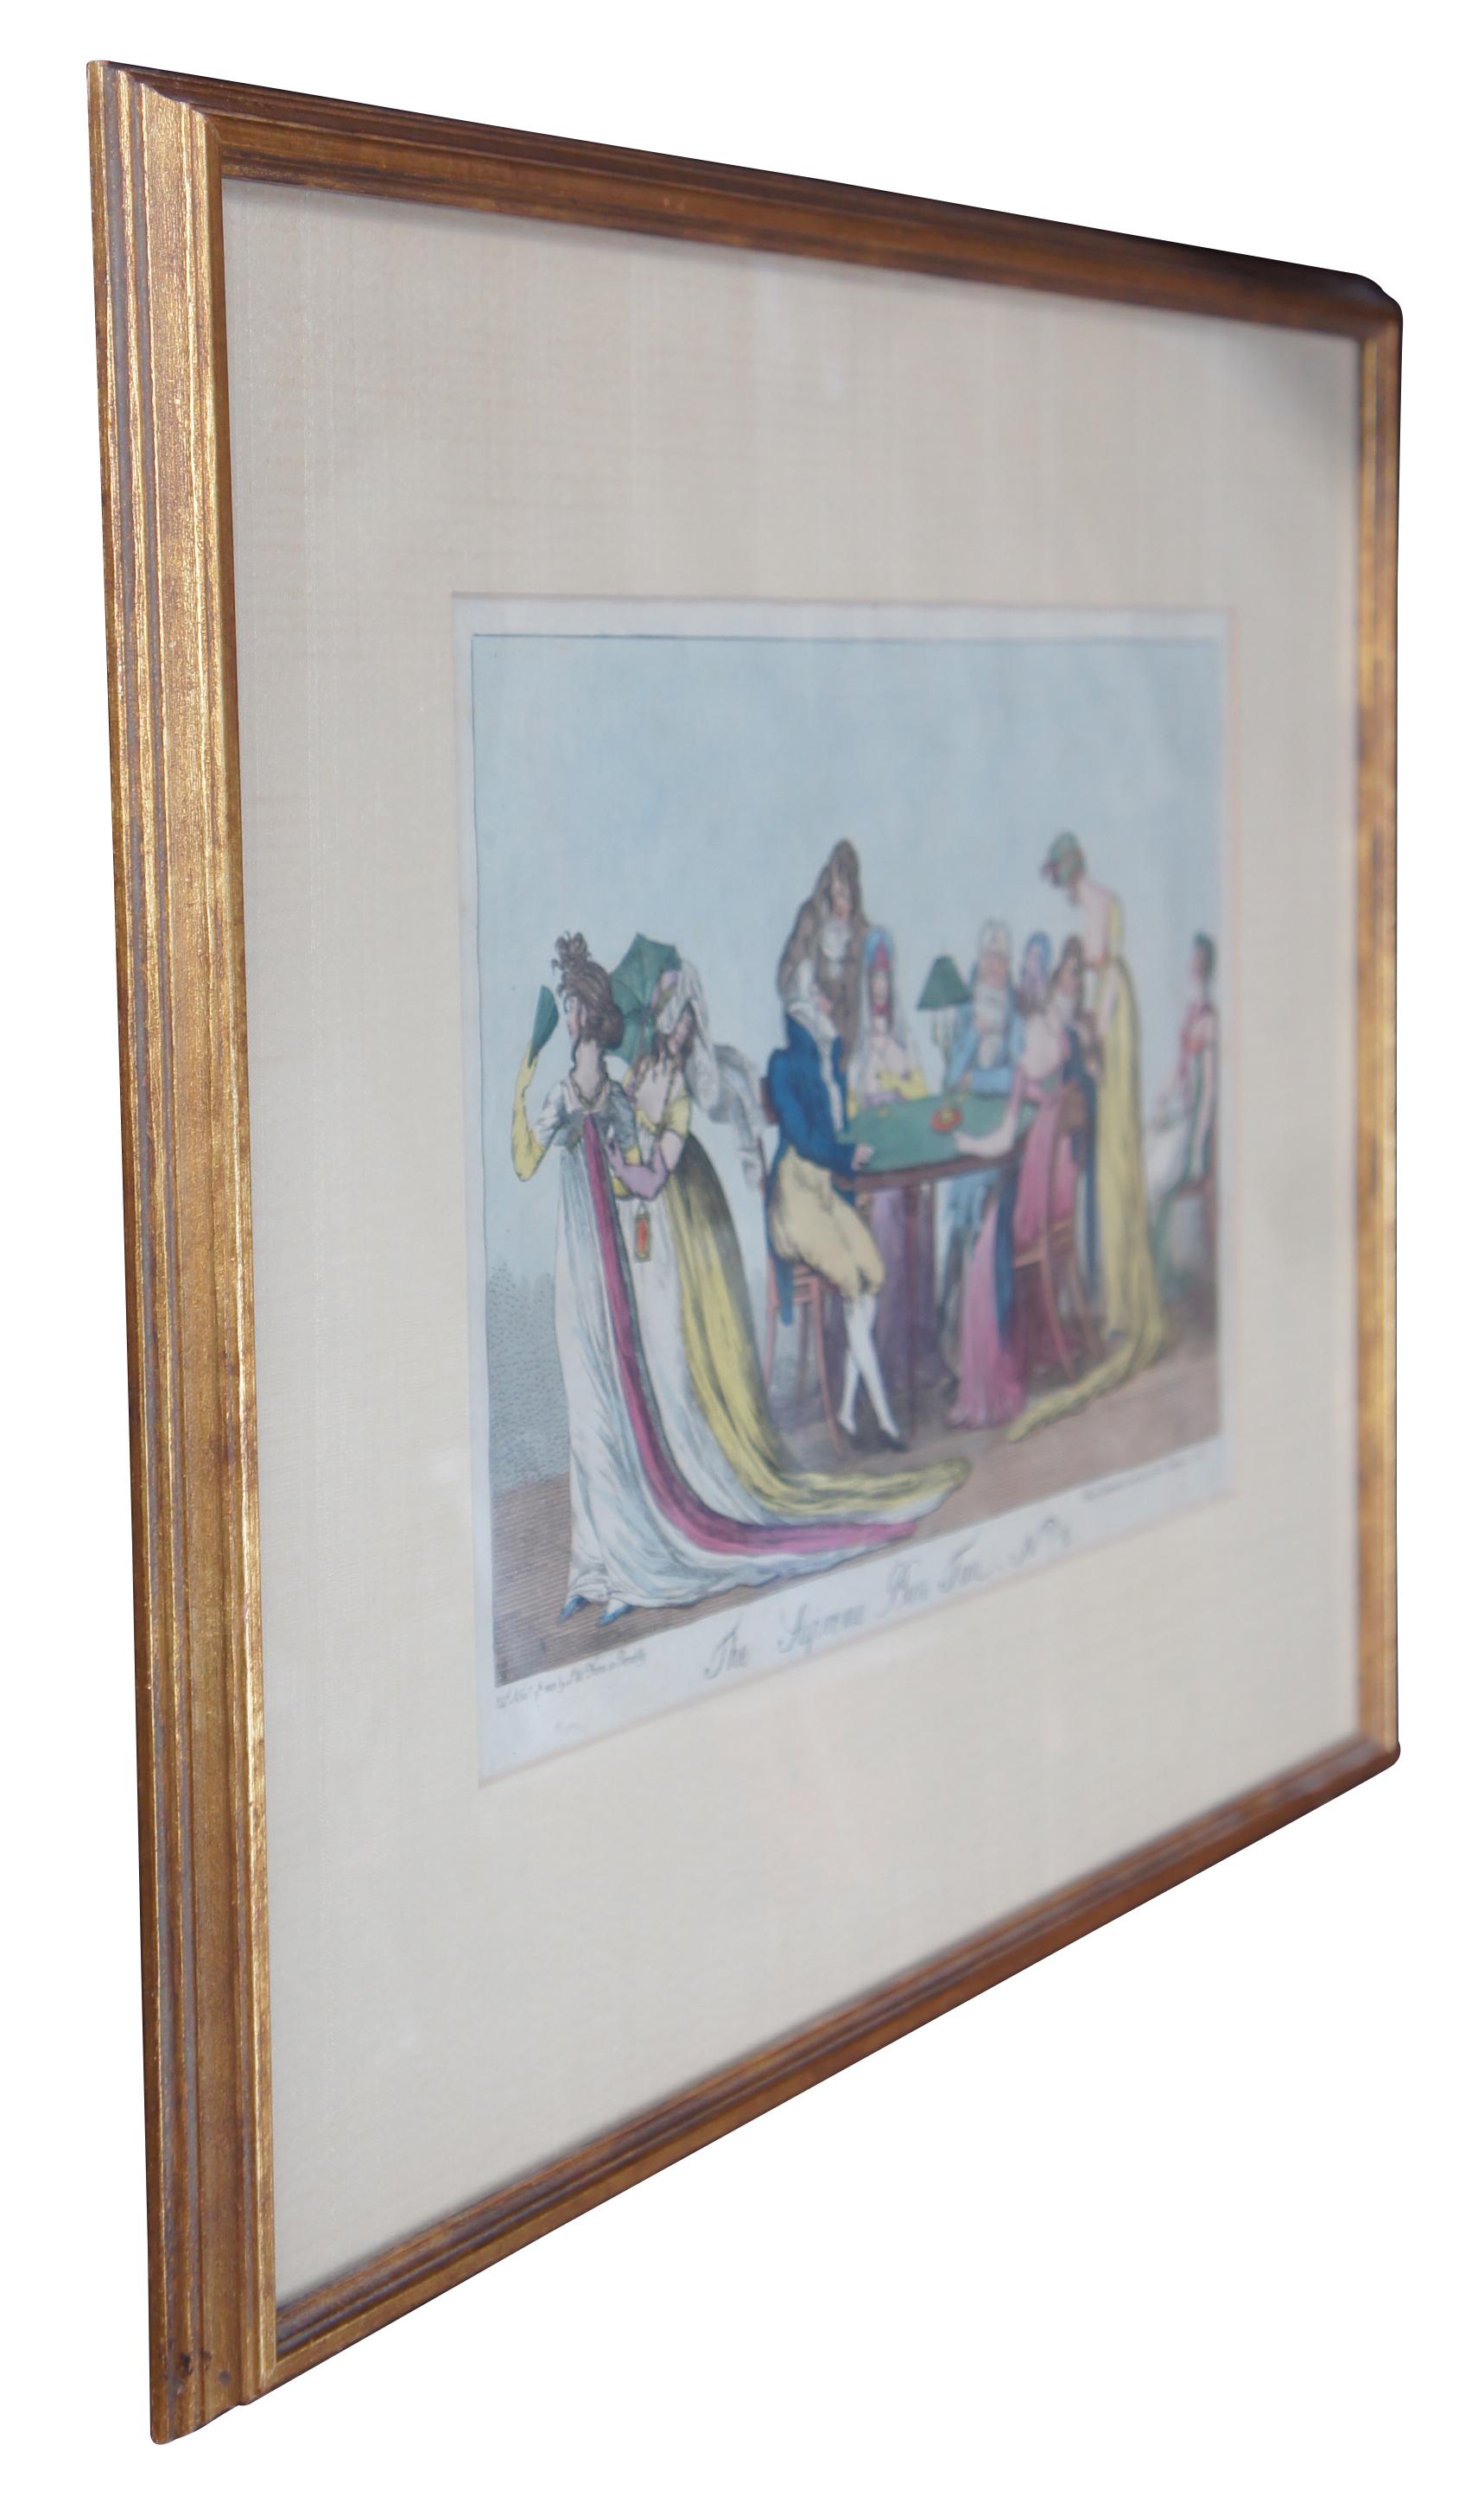 Antique Martinet / SW Fores French Supreme Bon Ton hand colored etching featuring seven persons in fashionable clothes, playing a high stakes game of cards around a game table with a bouillotte lamp. circa 1801.

Series: Series: La Bouillotte